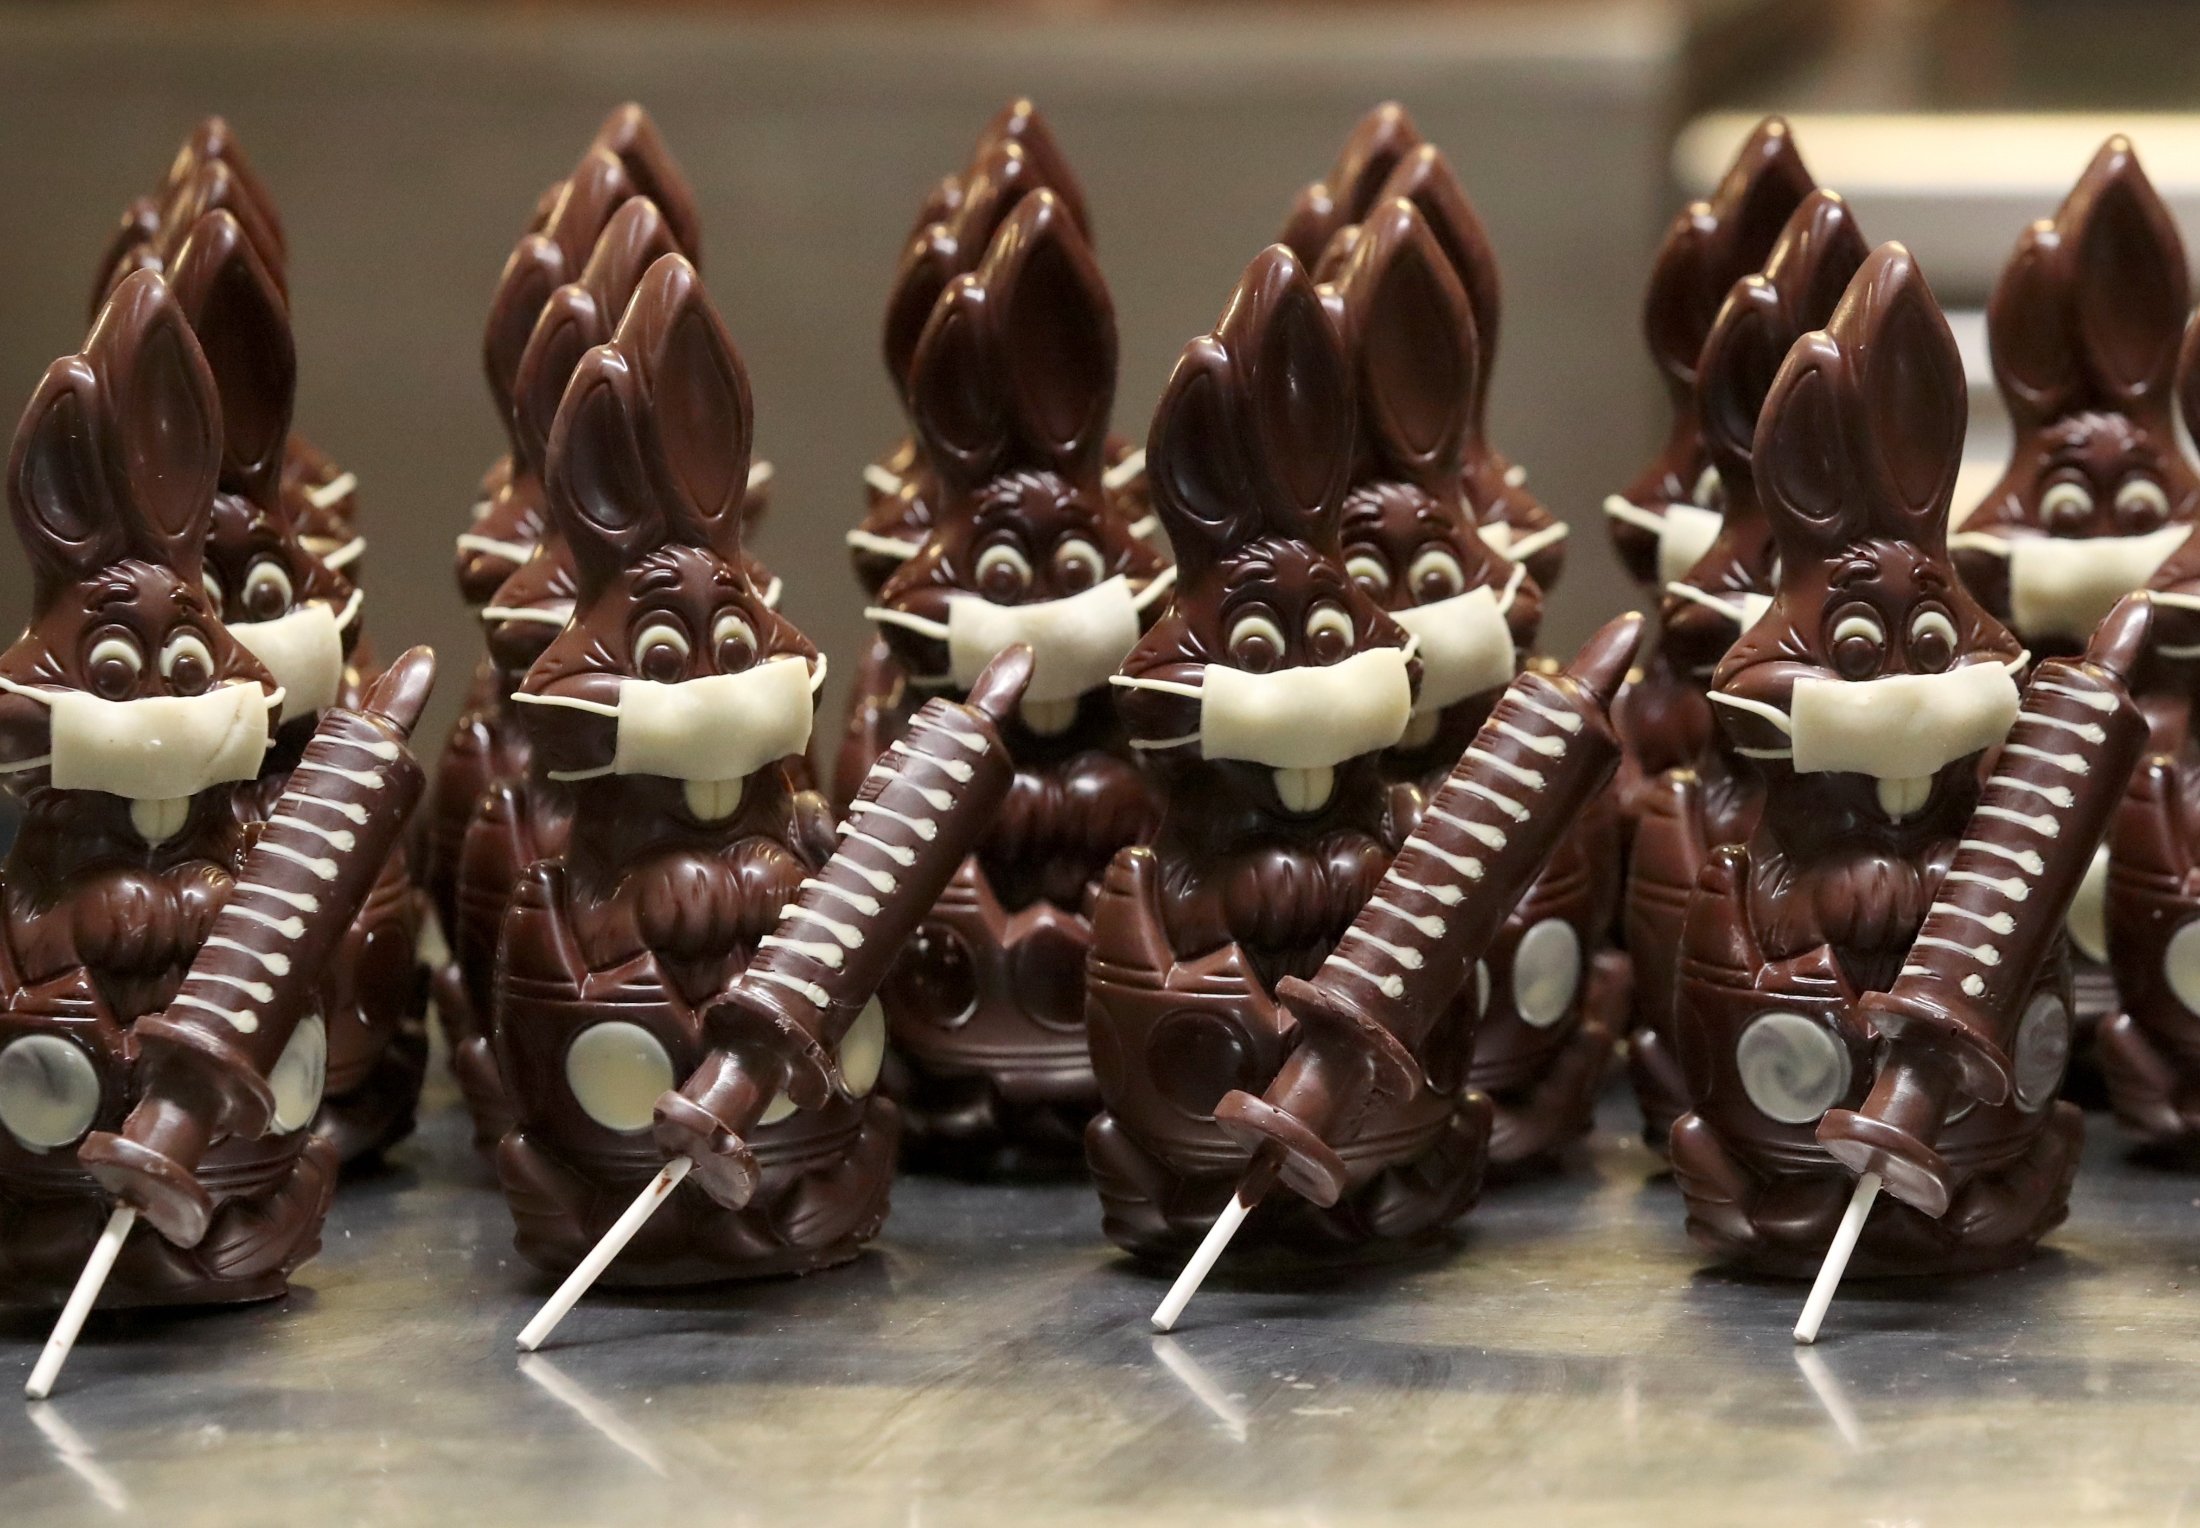 Chocolate bunnies wearing protective masks and holding vaccine syringes called “L'Atch'a Azteka” are seen at artisan Genevieve Trepant's workshop, Cocoatree in Lonzee, Belgium, April 30, 2021. (Reuters Photo)